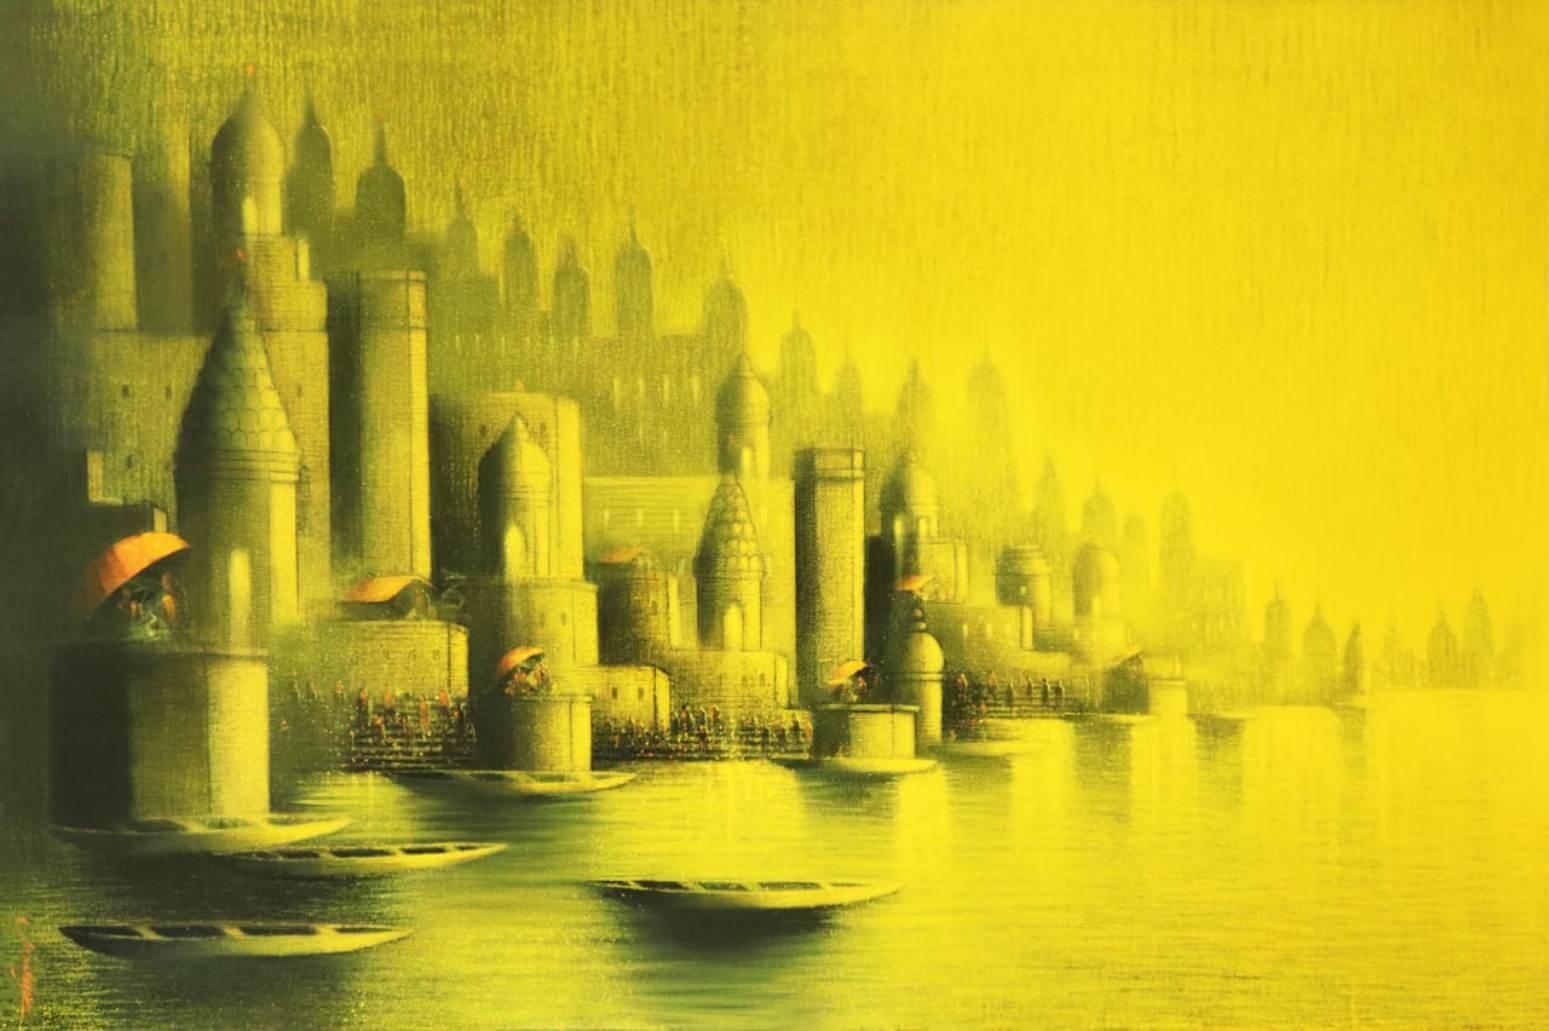 Holi Banaras, Charcoal, Acrylic, Canvas by Contemporary Artist Indian "In Stock" - Mixed Media Art by Somnath Bothe